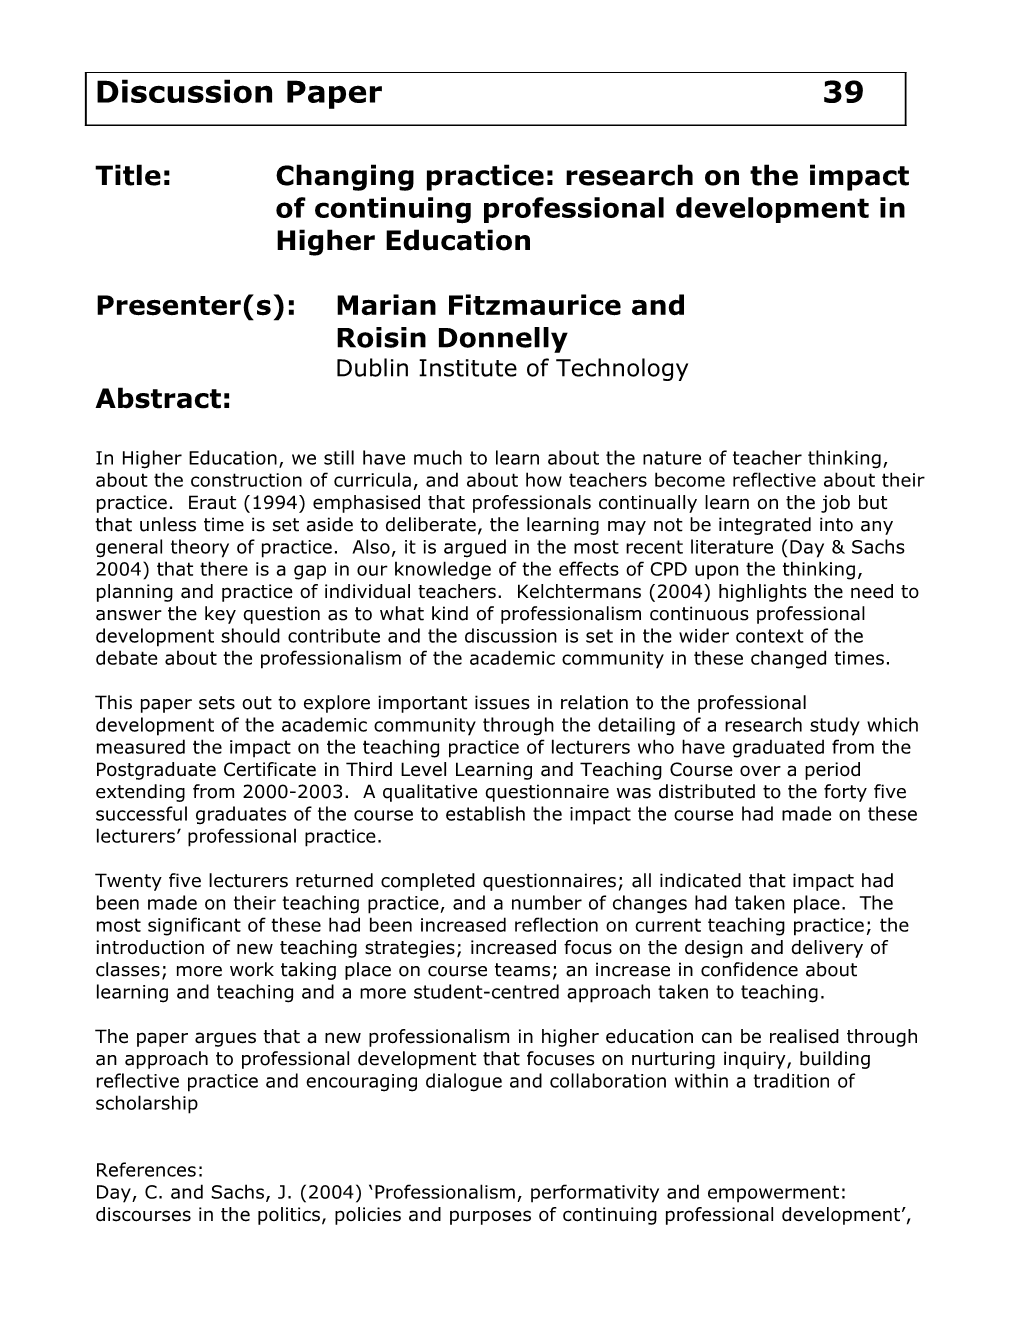 Title:Changing Practice: Research on the Impact of Continuing Professional Development